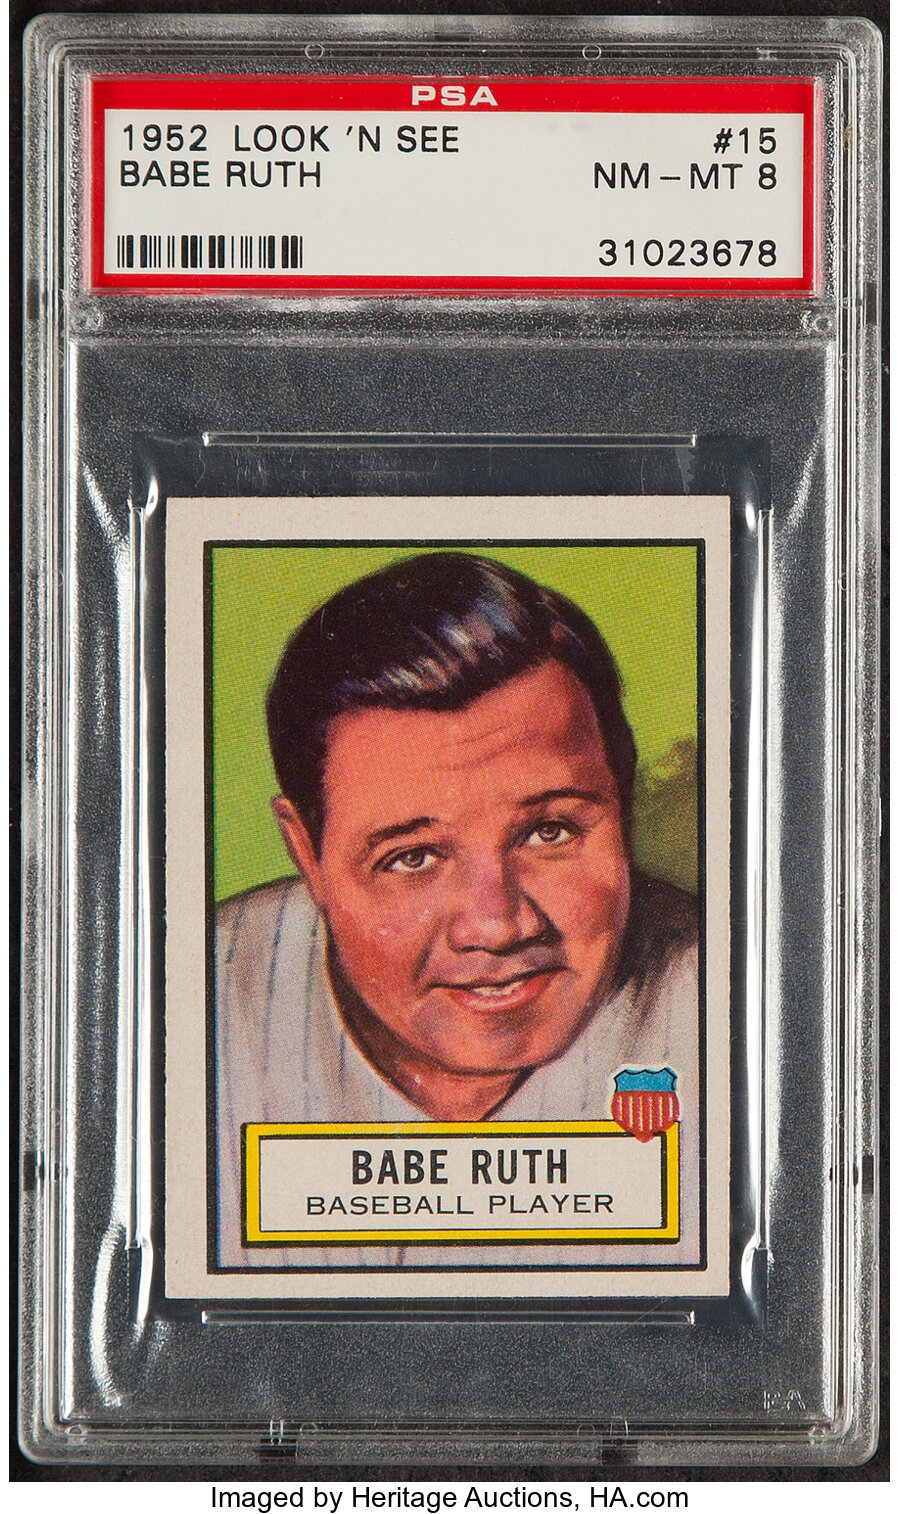 1952 Topps Look 'N See Babe Ruth #15 PSA NM-MT 8